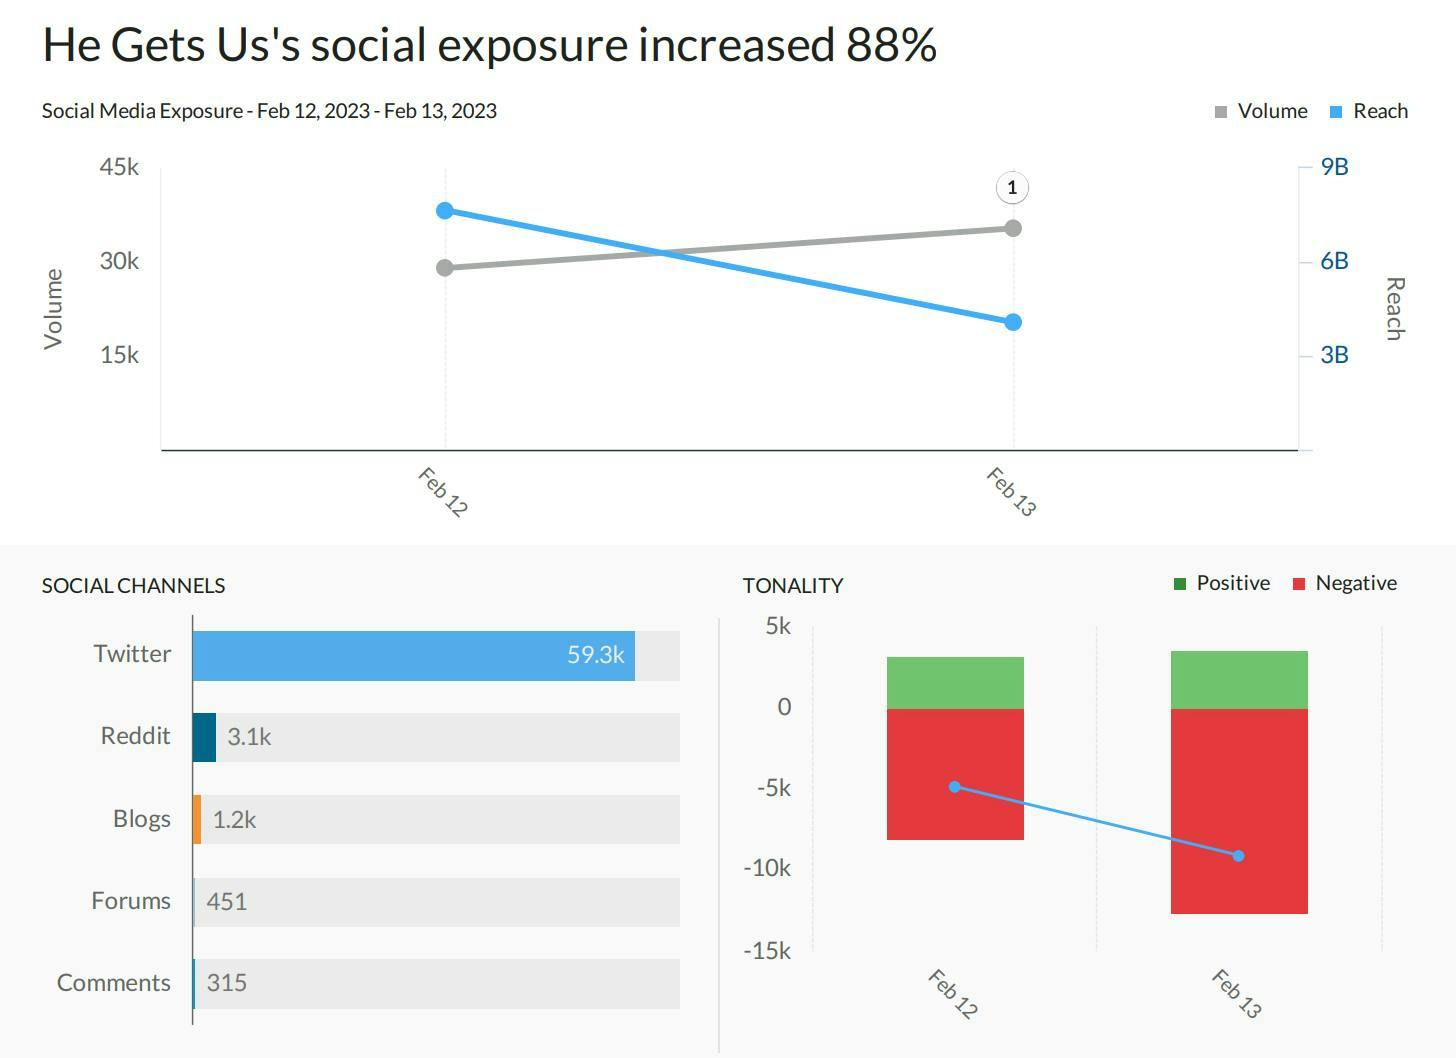 Charts showing He Gets Us's 88% increase of social exposure and decrease of tonality